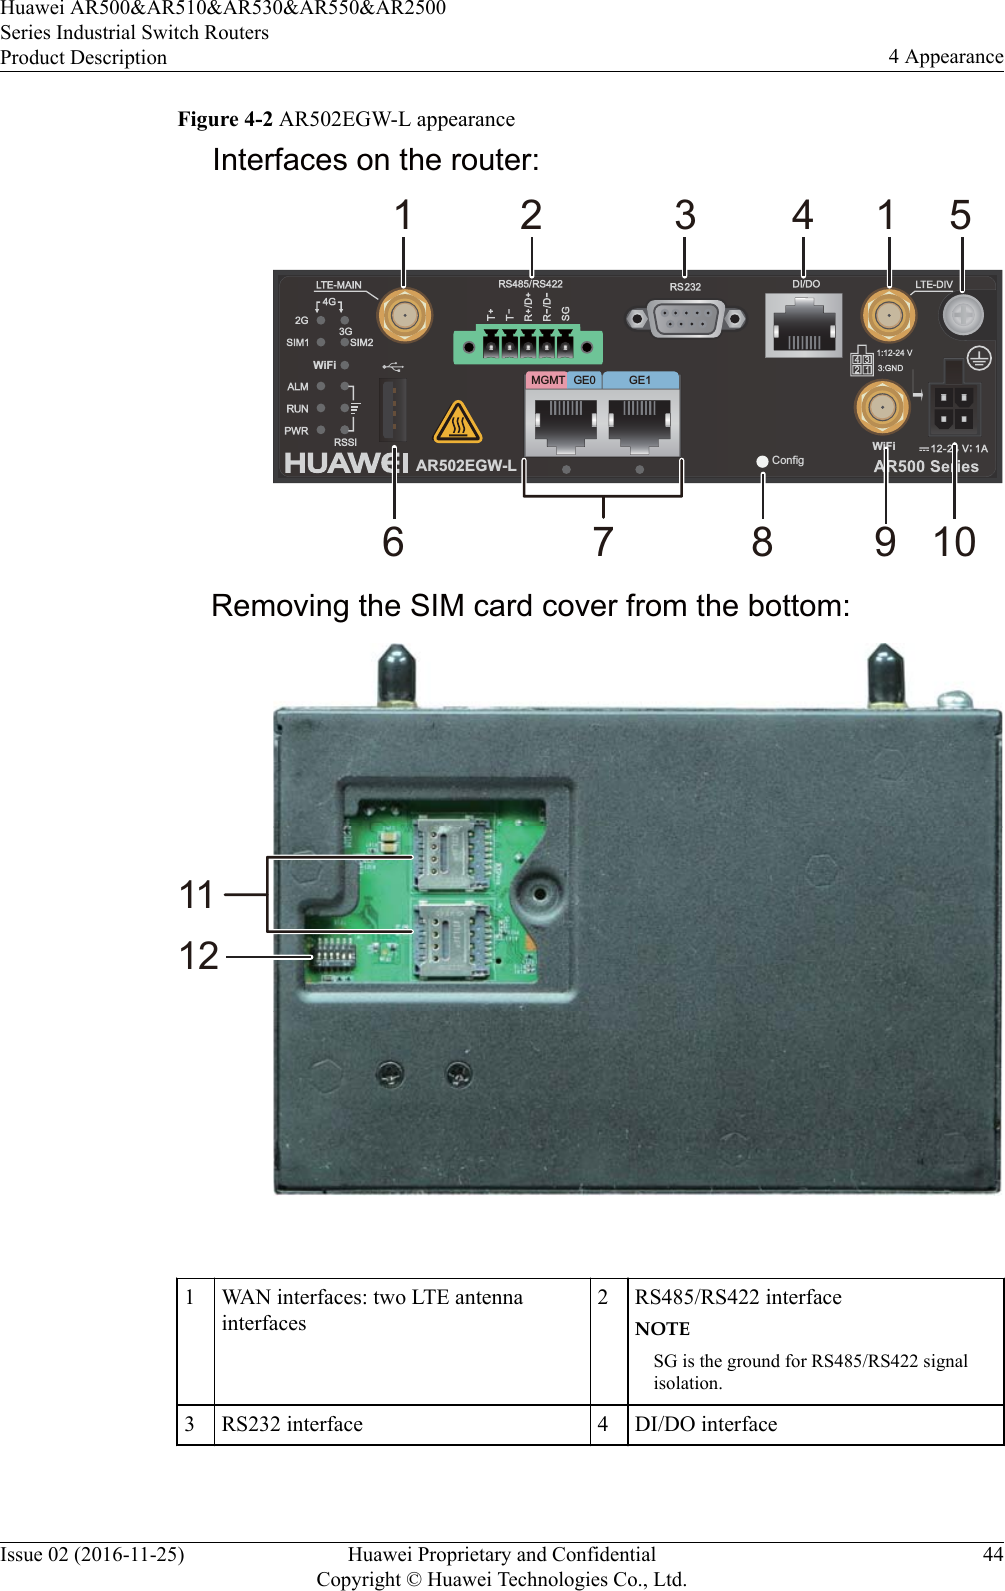 Figure 4-2 AR502EGW-L appearanceGE1ConfigWiFiWiFiMGMT GE0AR502EGW-L87612 34 51091Removing the SIM card cover from the bottom:Interfaces on the router:1112 1WAN interfaces: two LTE antennainterfaces2 RS485/RS422 interfaceNOTESG is the ground for RS485/RS422 signalisolation.3 RS232 interface 4 DI/DO interfaceHuawei AR500&amp;AR510&amp;AR530&amp;AR550&amp;AR2500Series Industrial Switch RoutersProduct Description 4 AppearanceIssue 02 (2016-11-25) Huawei Proprietary and ConfidentialCopyright © Huawei Technologies Co., Ltd.44